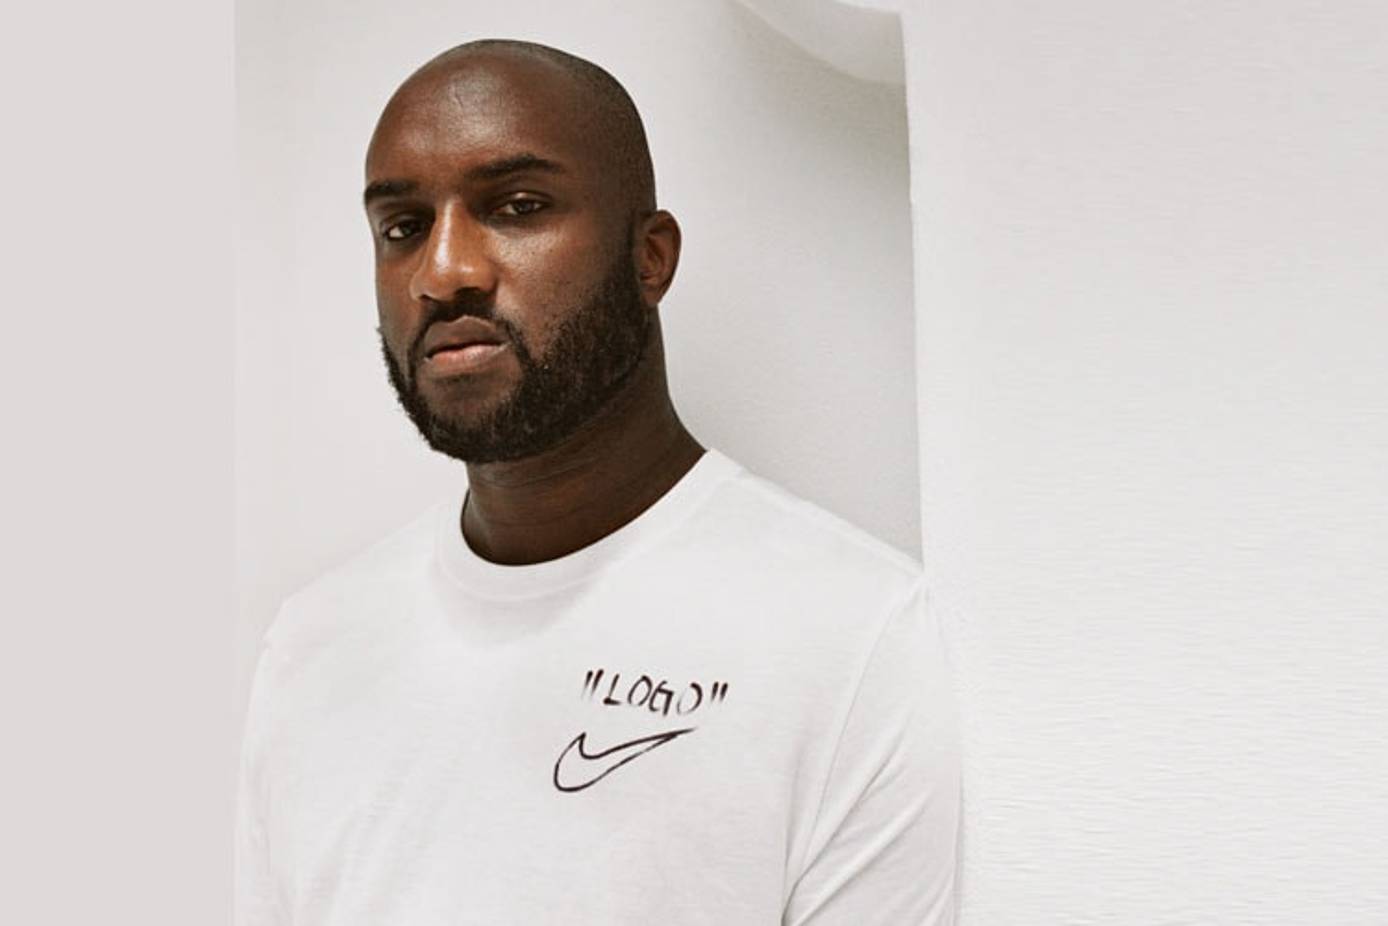 Evian Teams Up With Louis Vuitton Designer Virgil Abloh to Create